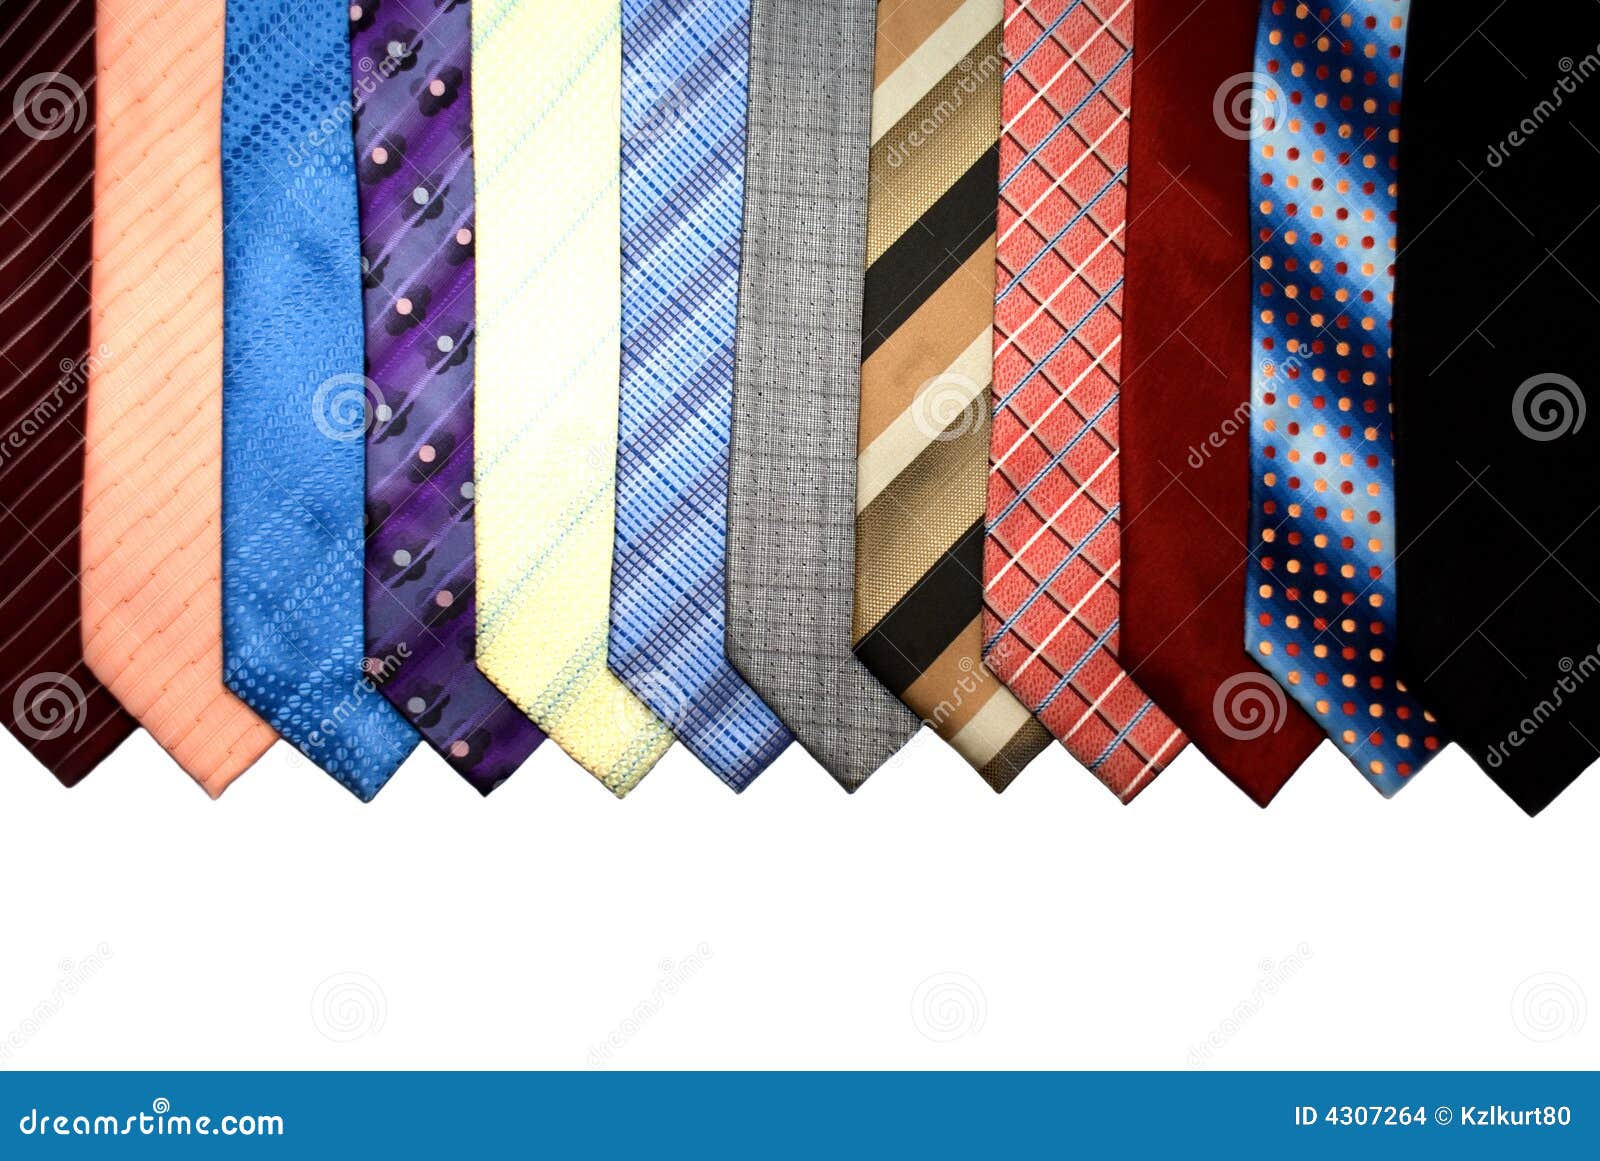 Group of Different Coloured Ties Stock Photo - Image of cravat, bunch ...